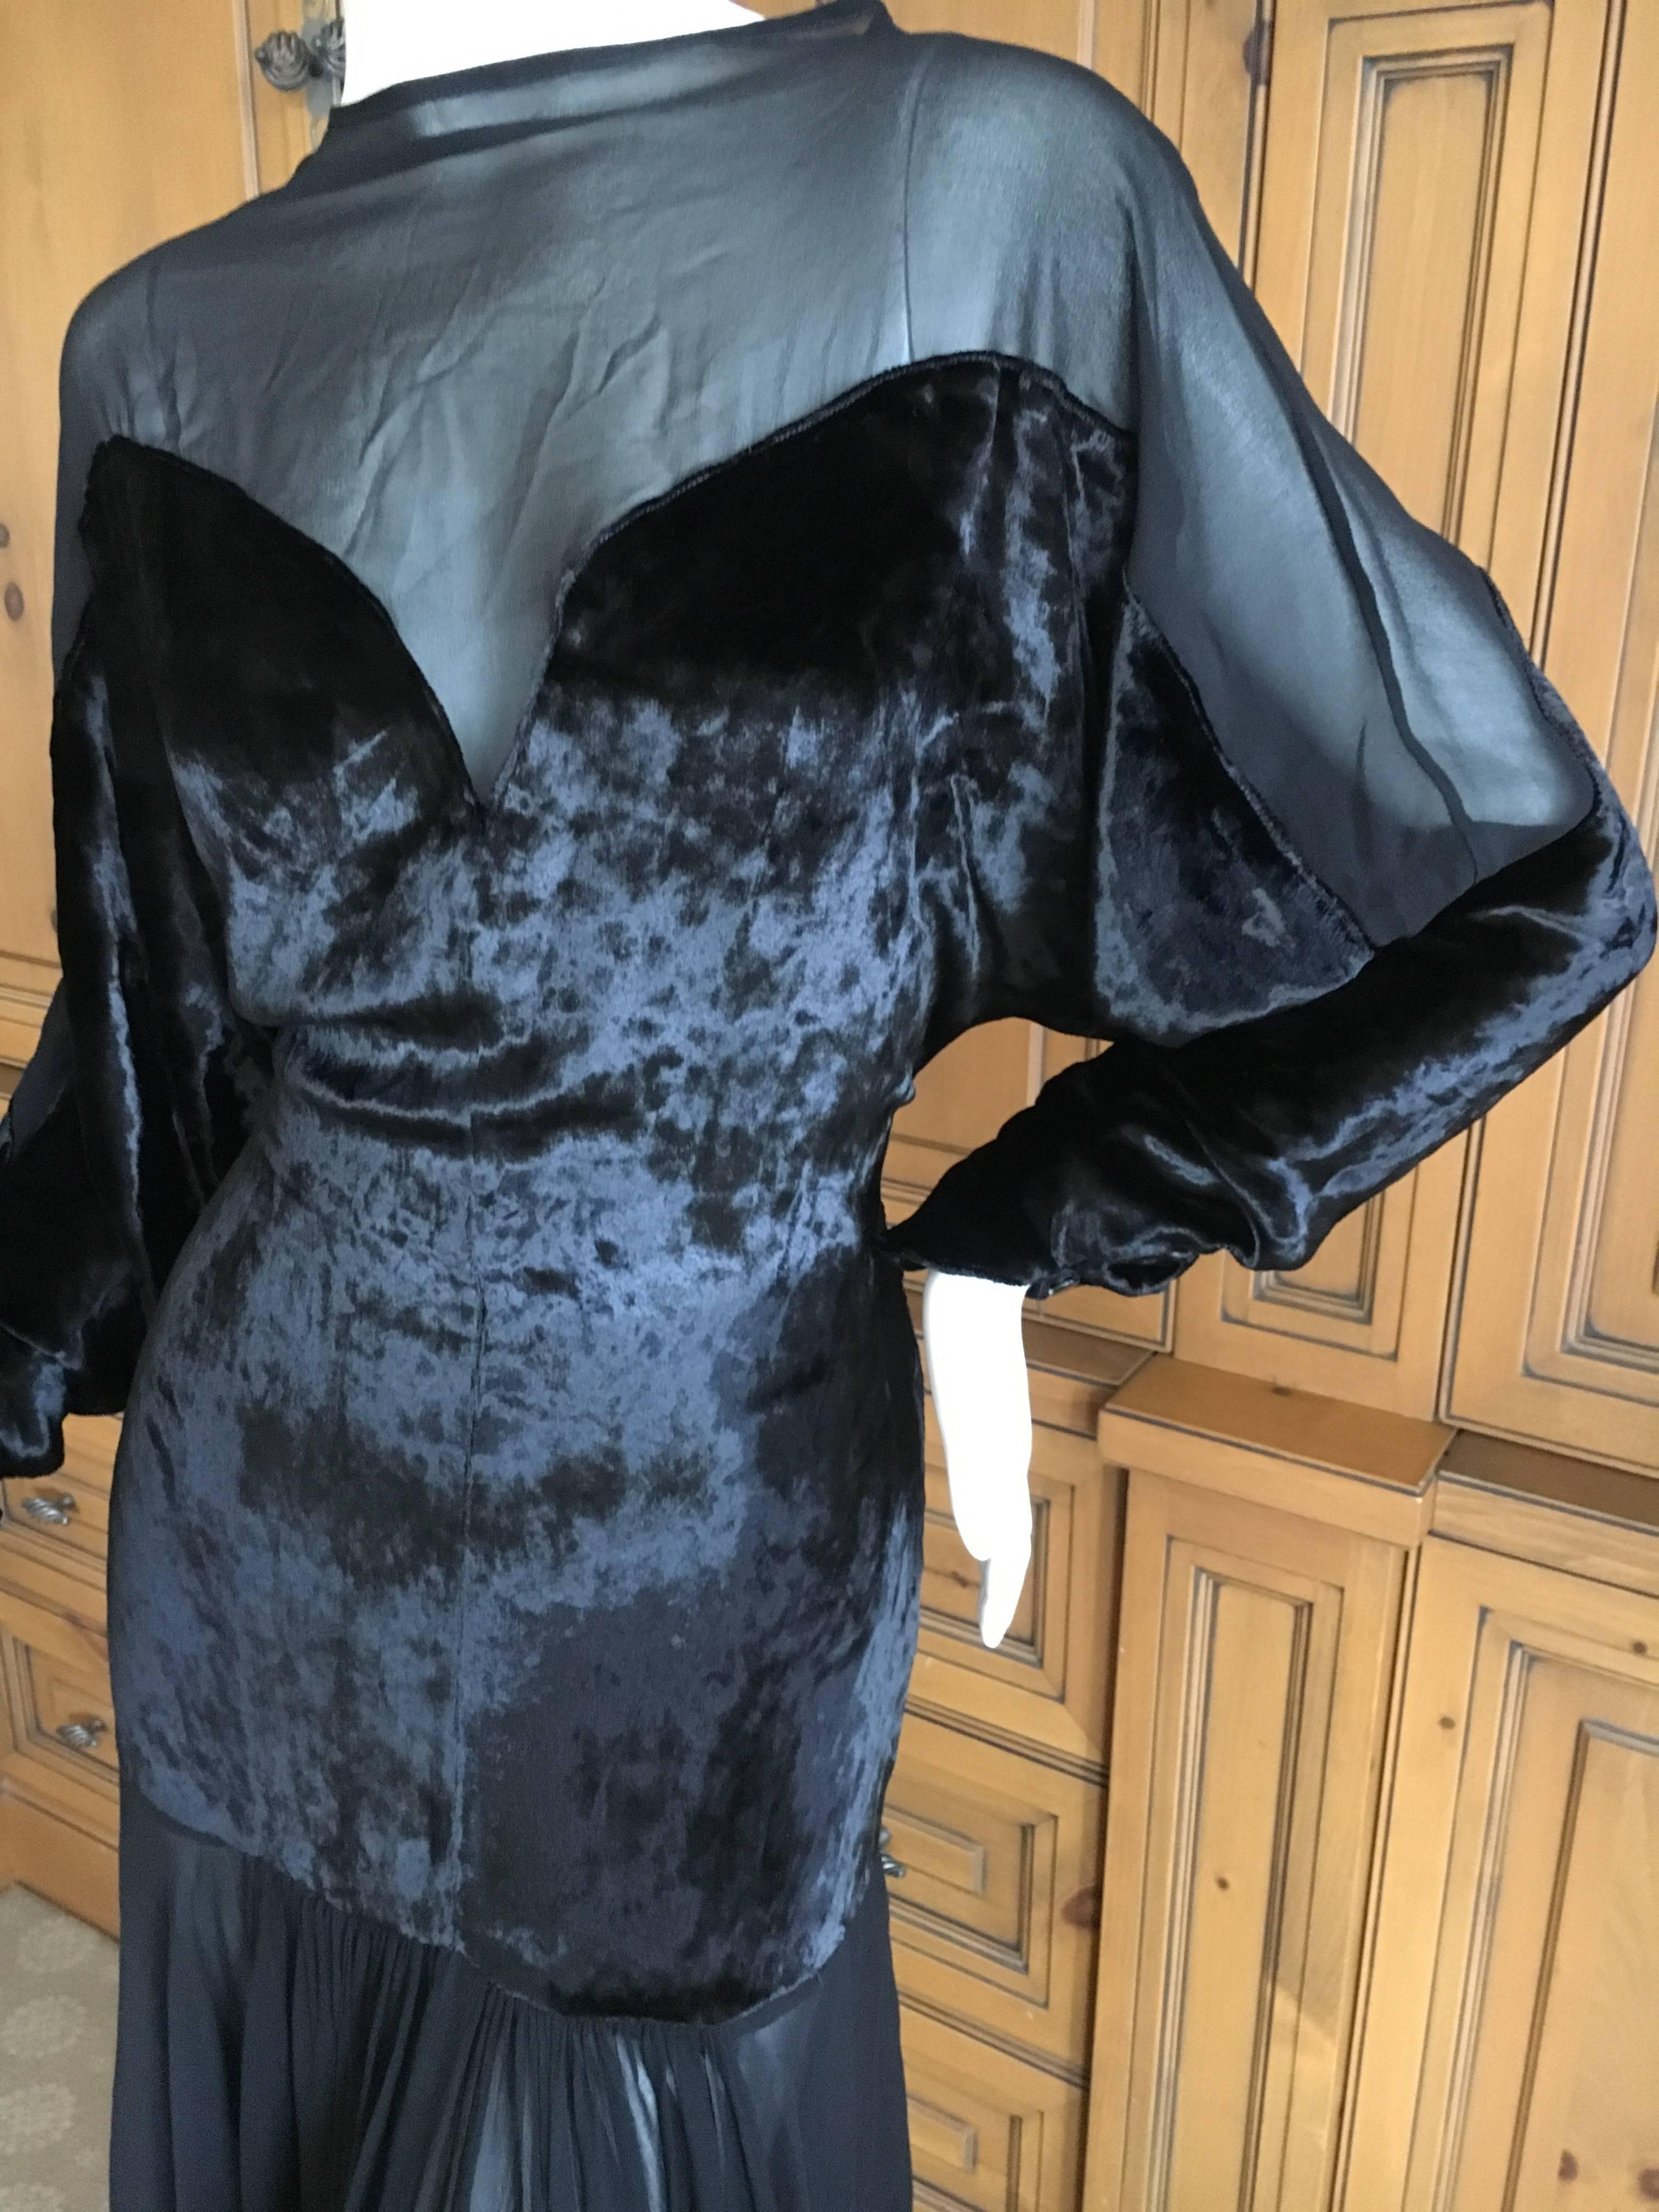 Thierry Mugler Black Velvet and Sheer Chiffon Evening Dress In Good Condition For Sale In Cloverdale, CA